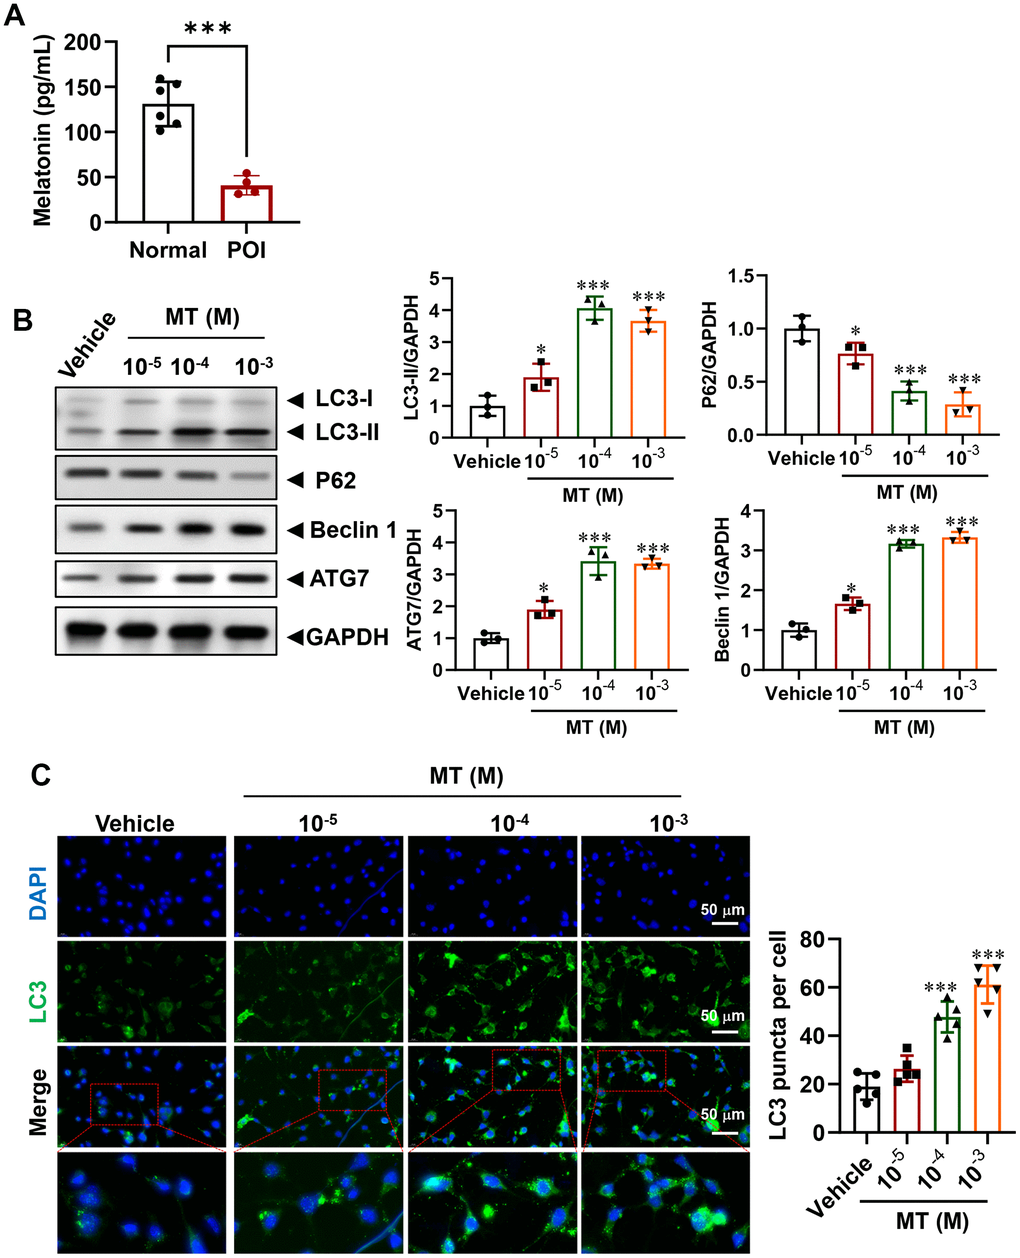 Regulation of autophagy in POI-GCs by melatonin (MT). (A) ELISA analysis of MT levels in GCs (n = 4-6). (B) Representative WB and analysis of autophagy-related proteins in POI-GCs after MT treatment (n = 3). (C) Representative IF staining and analysis of autophagy flux in POI-GCs after MT treatment (n = 5). Scale bar, 50 μm. *p 